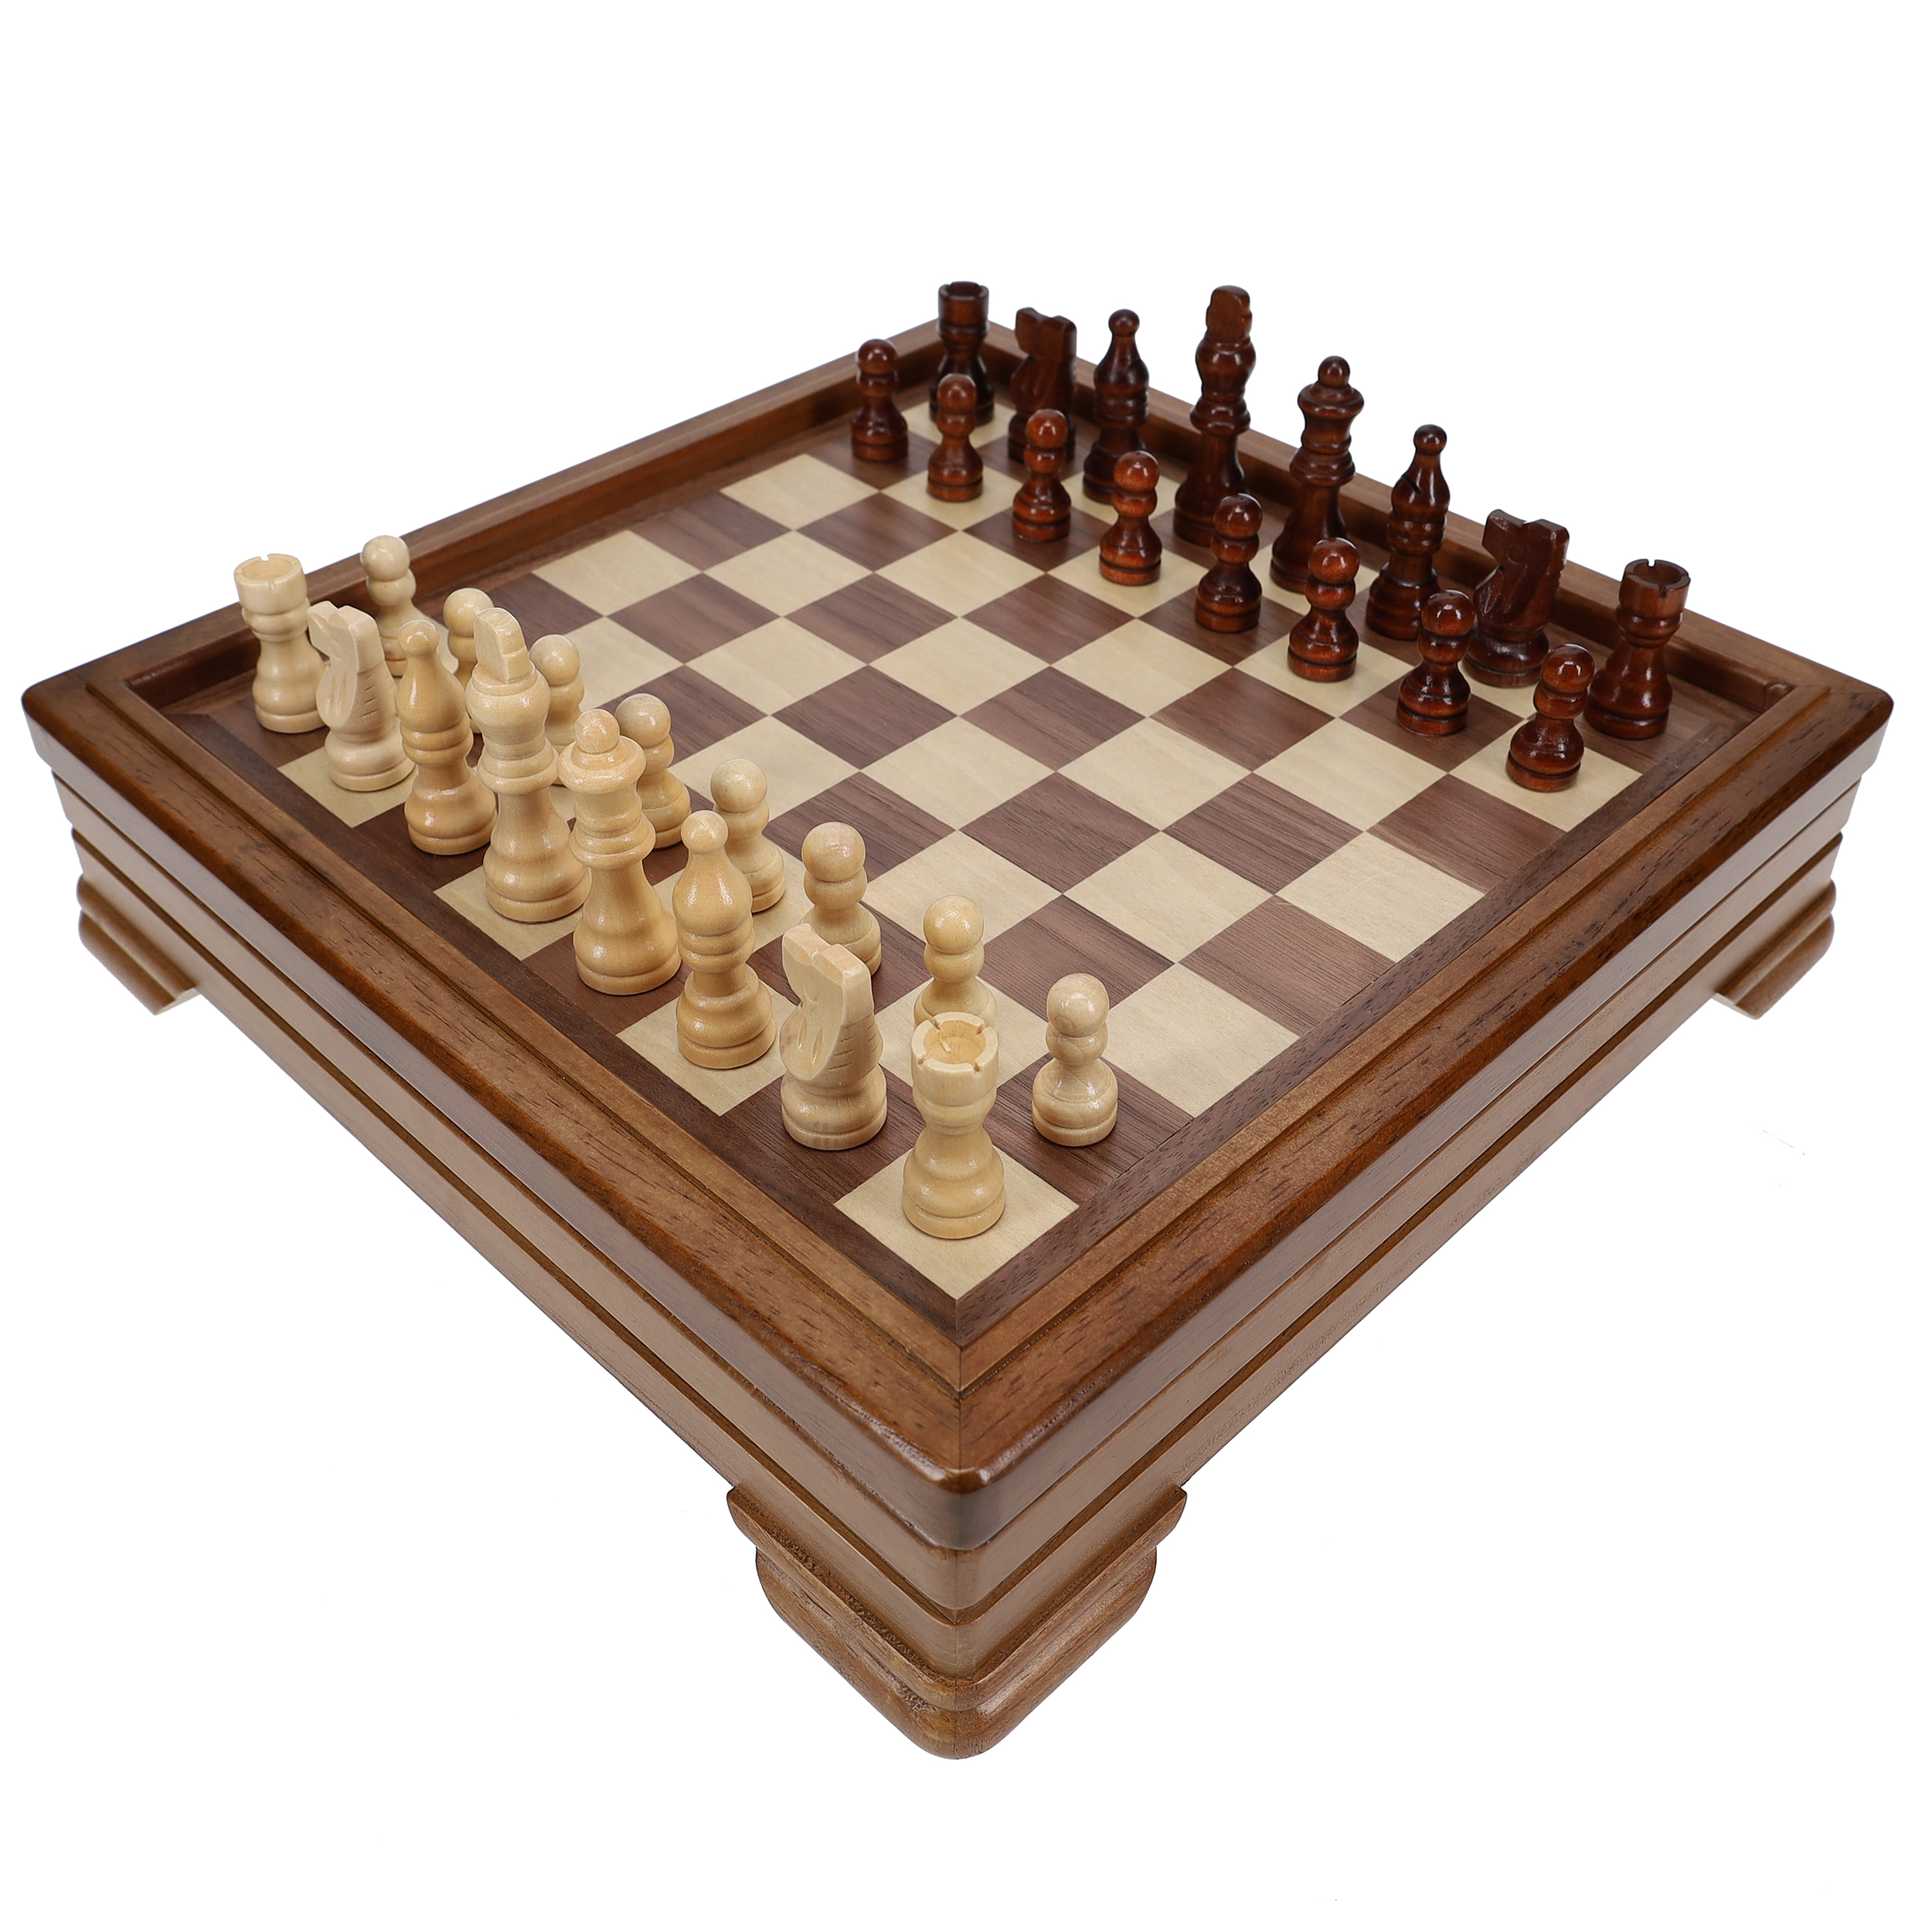 Offelec 9 in 1 Wood Board Classic Games Set Include Chess, Checkers,  Backgammon, Ludo, Nine Men's Morris, Dominoes, Playing Cards, Cribbage, and  Pick